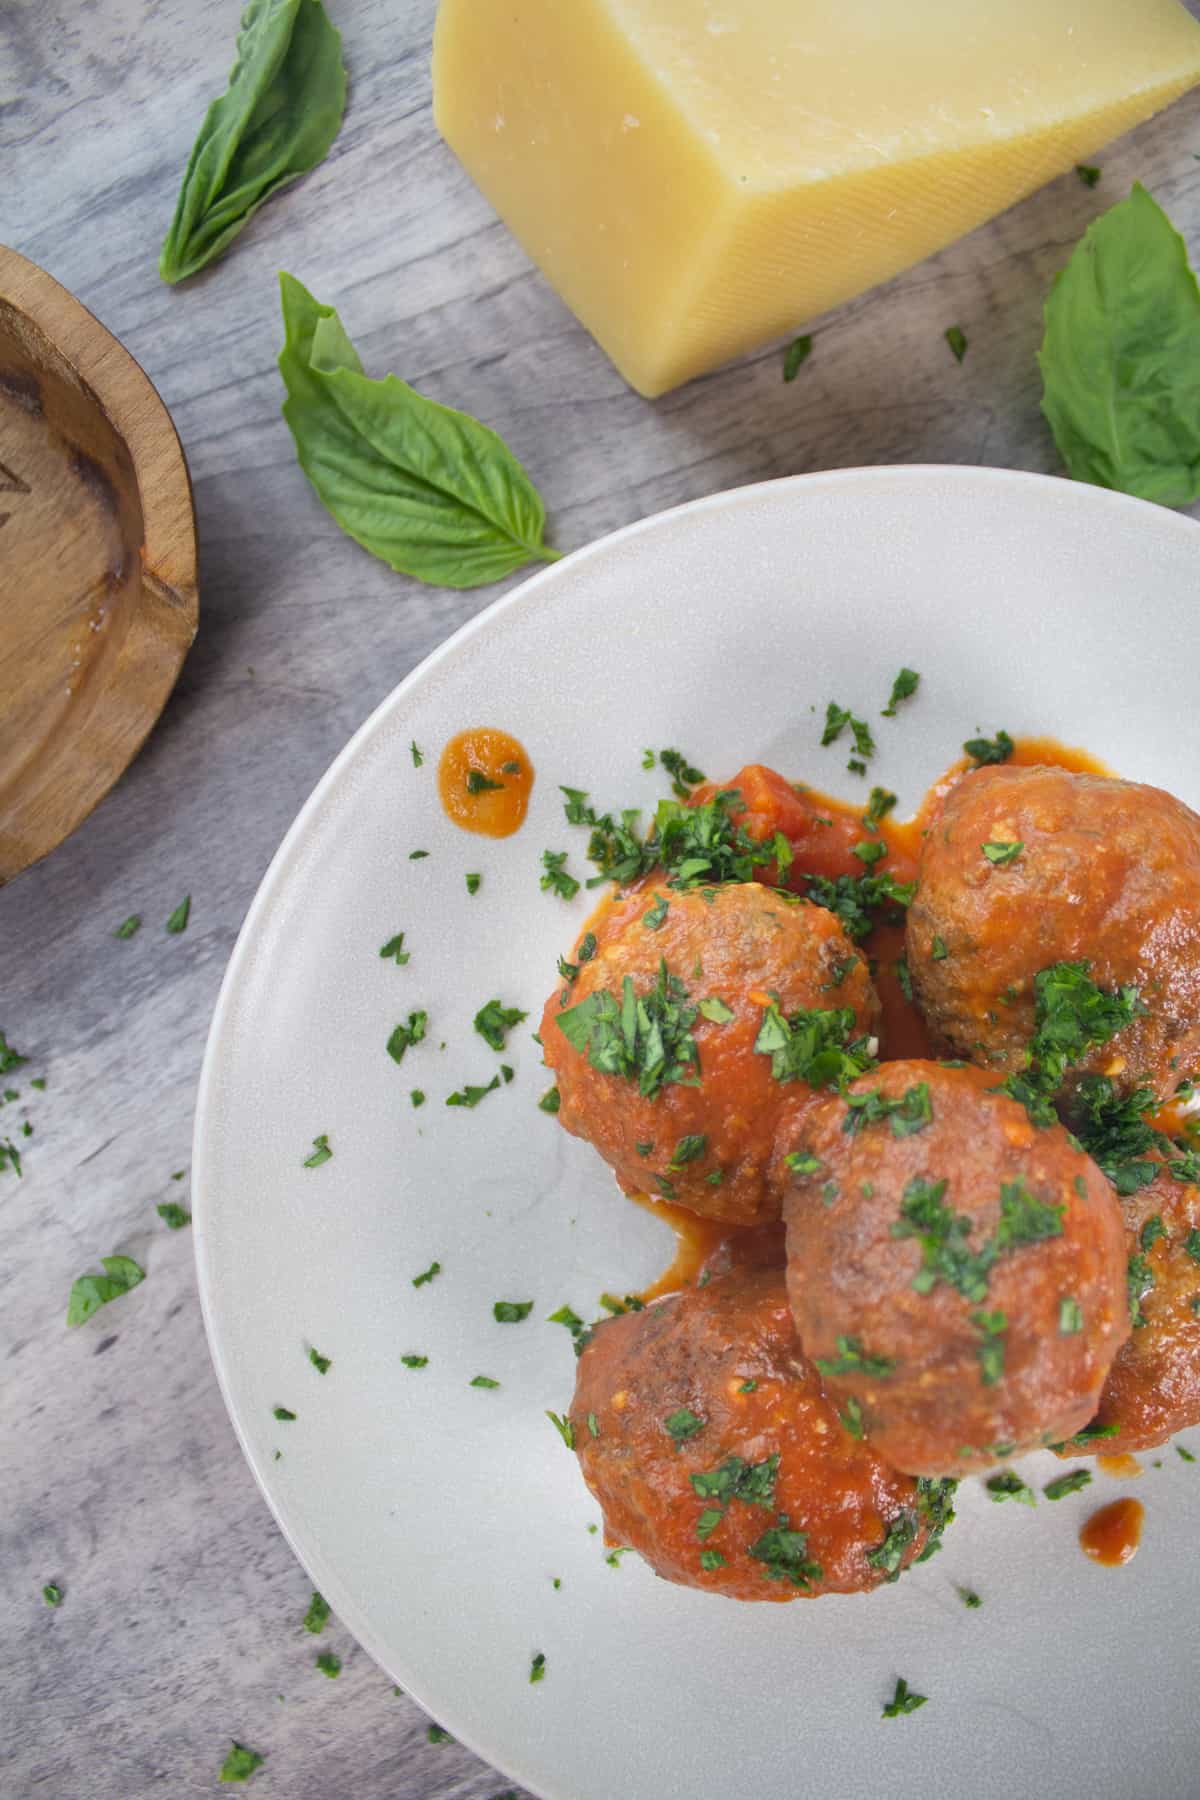 Meatballs served on a plate with fresh chopped parsley and garnished with basil and a block of parmesan cheese